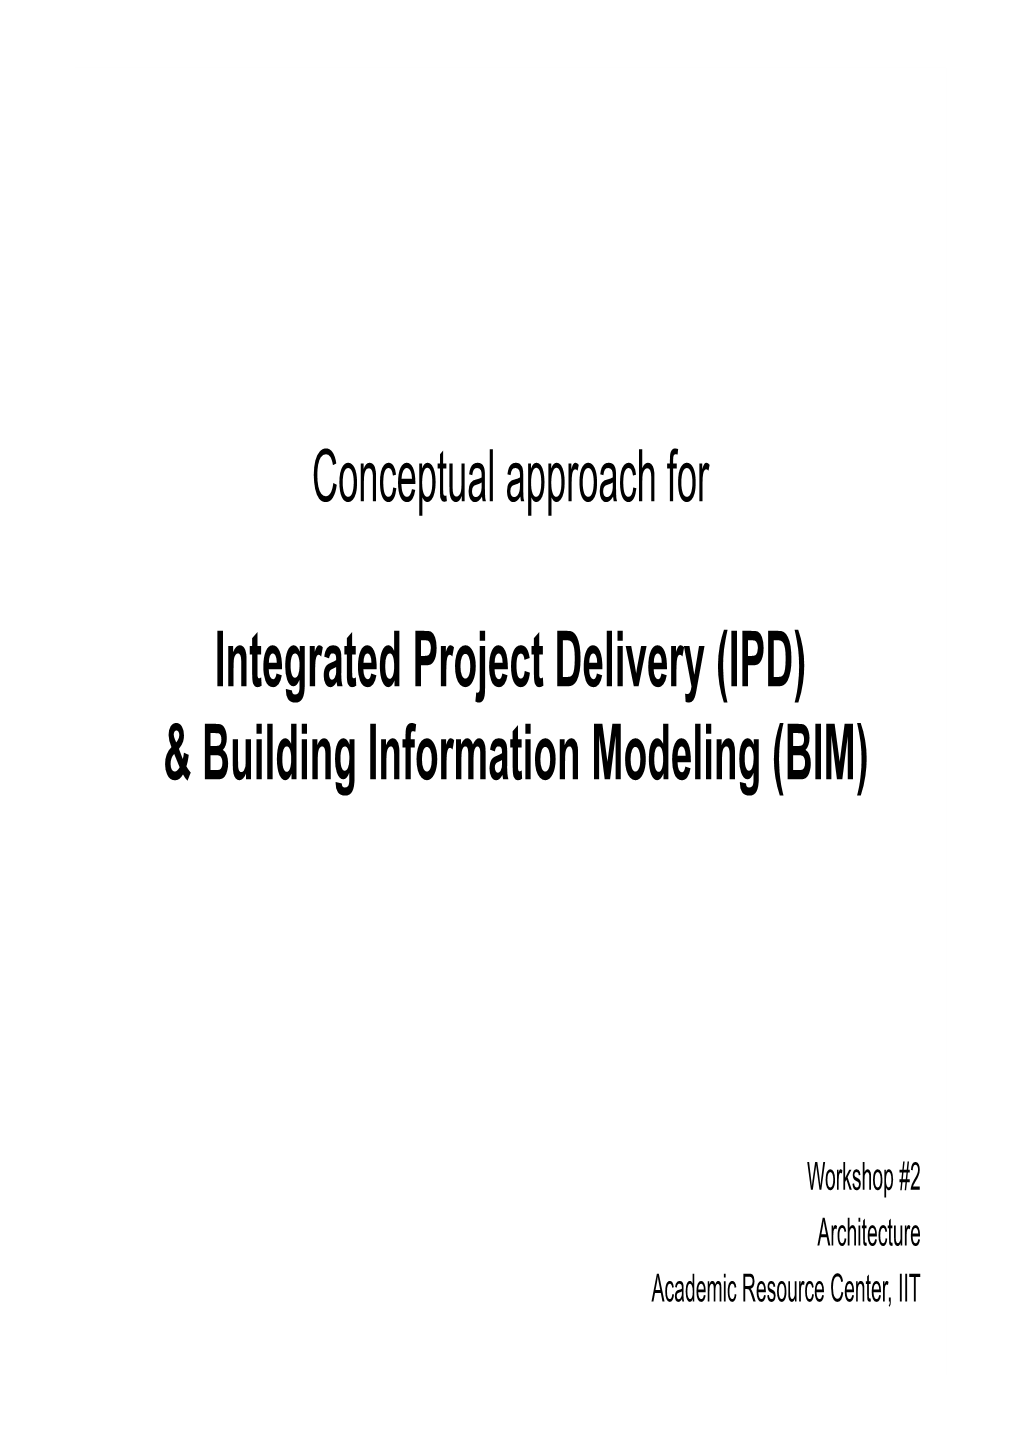 Integrated Project Delivery (IPD) & Building Information Modeling (BIM)